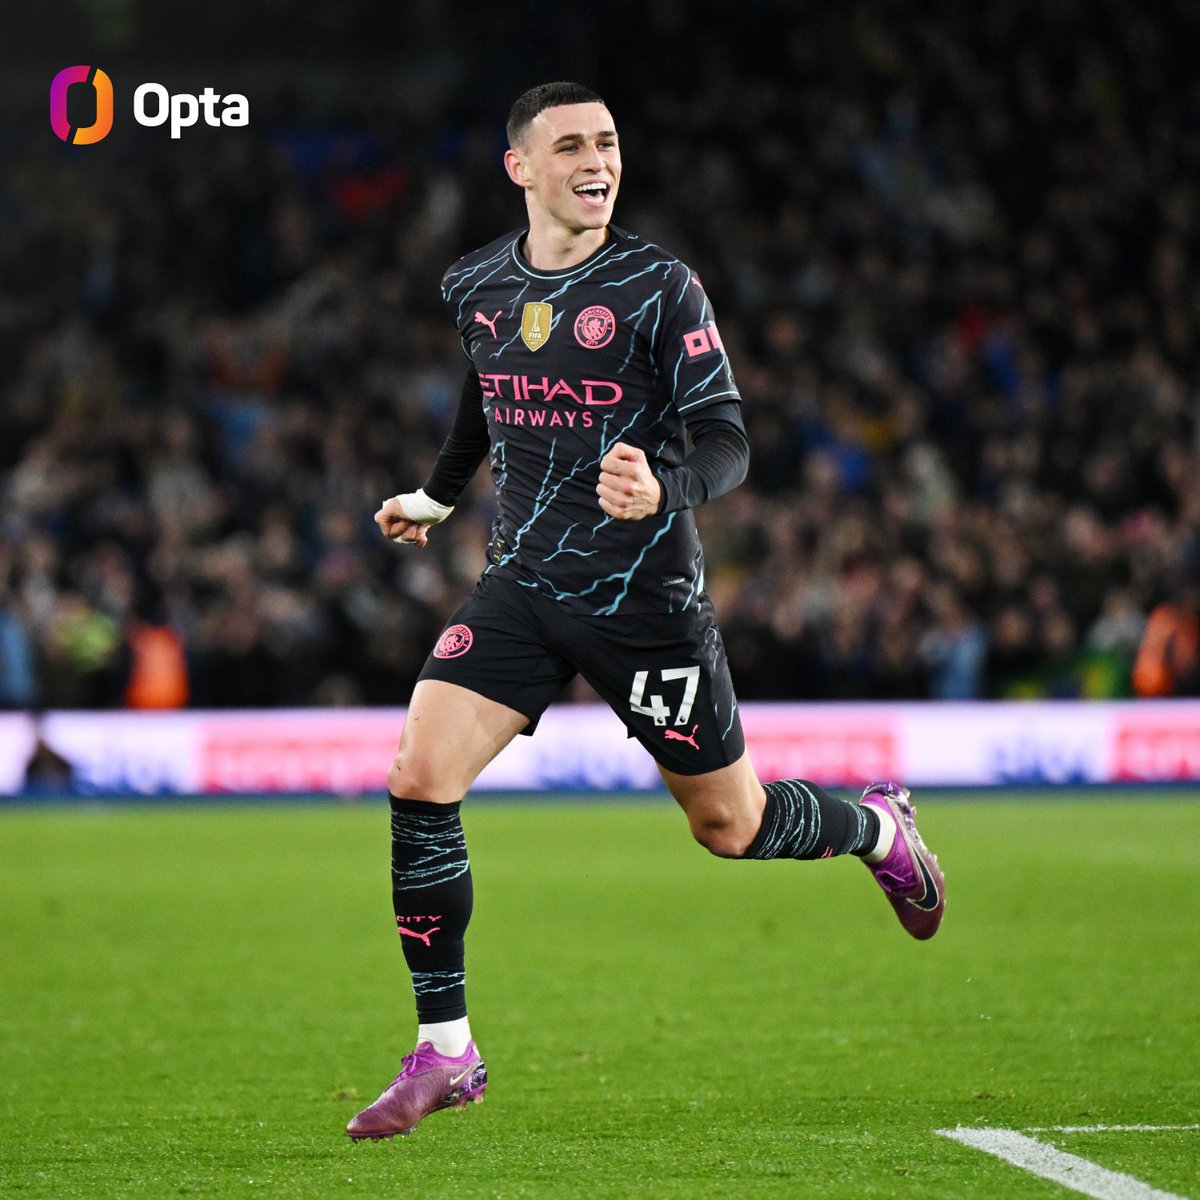 50 - Phil Foden has scored his 50th Premier League goal, and is only the third player to score 50 top-flight goals under Pep Guardiola while aged 23 or younger, after Lionel Messi and Erling Haaland. Star.